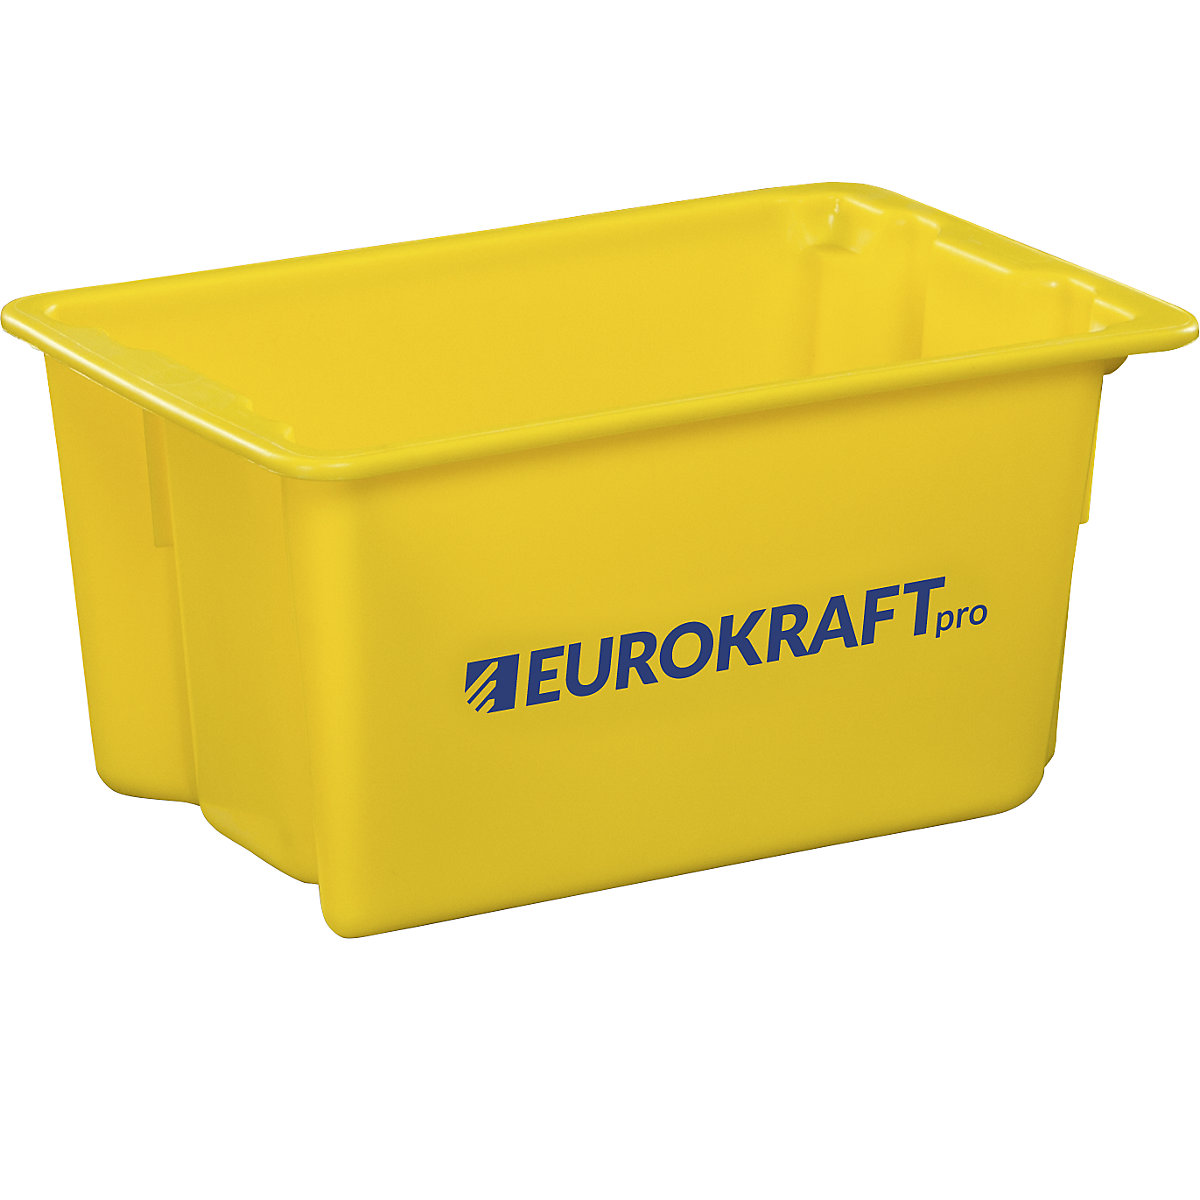 Stack/nest container made of polypropylene suitable for foodstuffs – eurokraft pro, 50 l capacity, pack of 3, solid walls and base, yellow